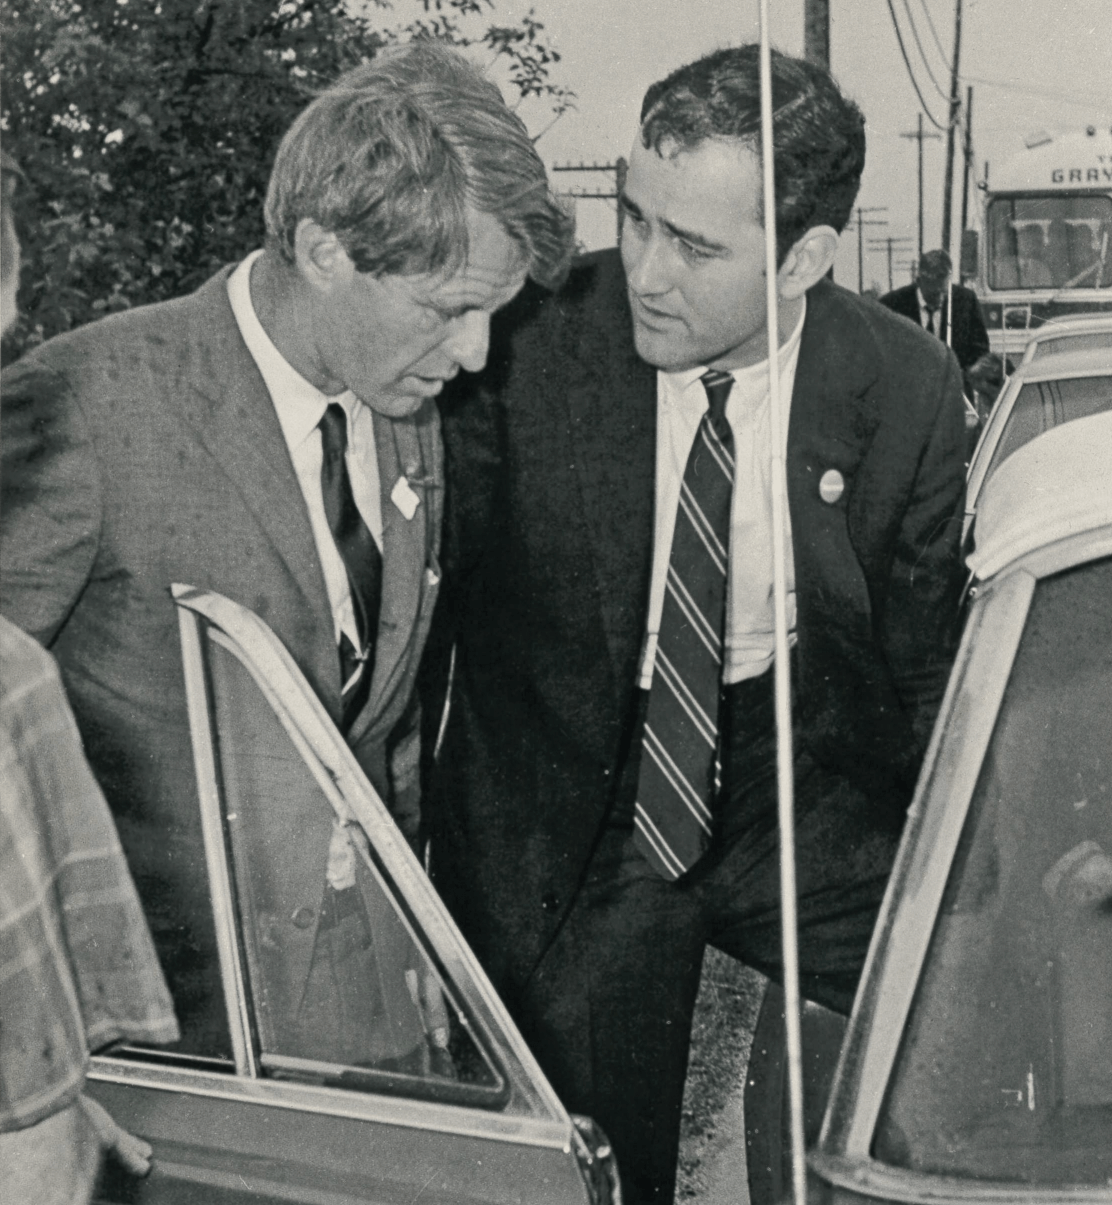 The author with RFK as he campaigned in Oregon 50 years ago. Kennedy lost the primary but went on to win California on the night he was shot.